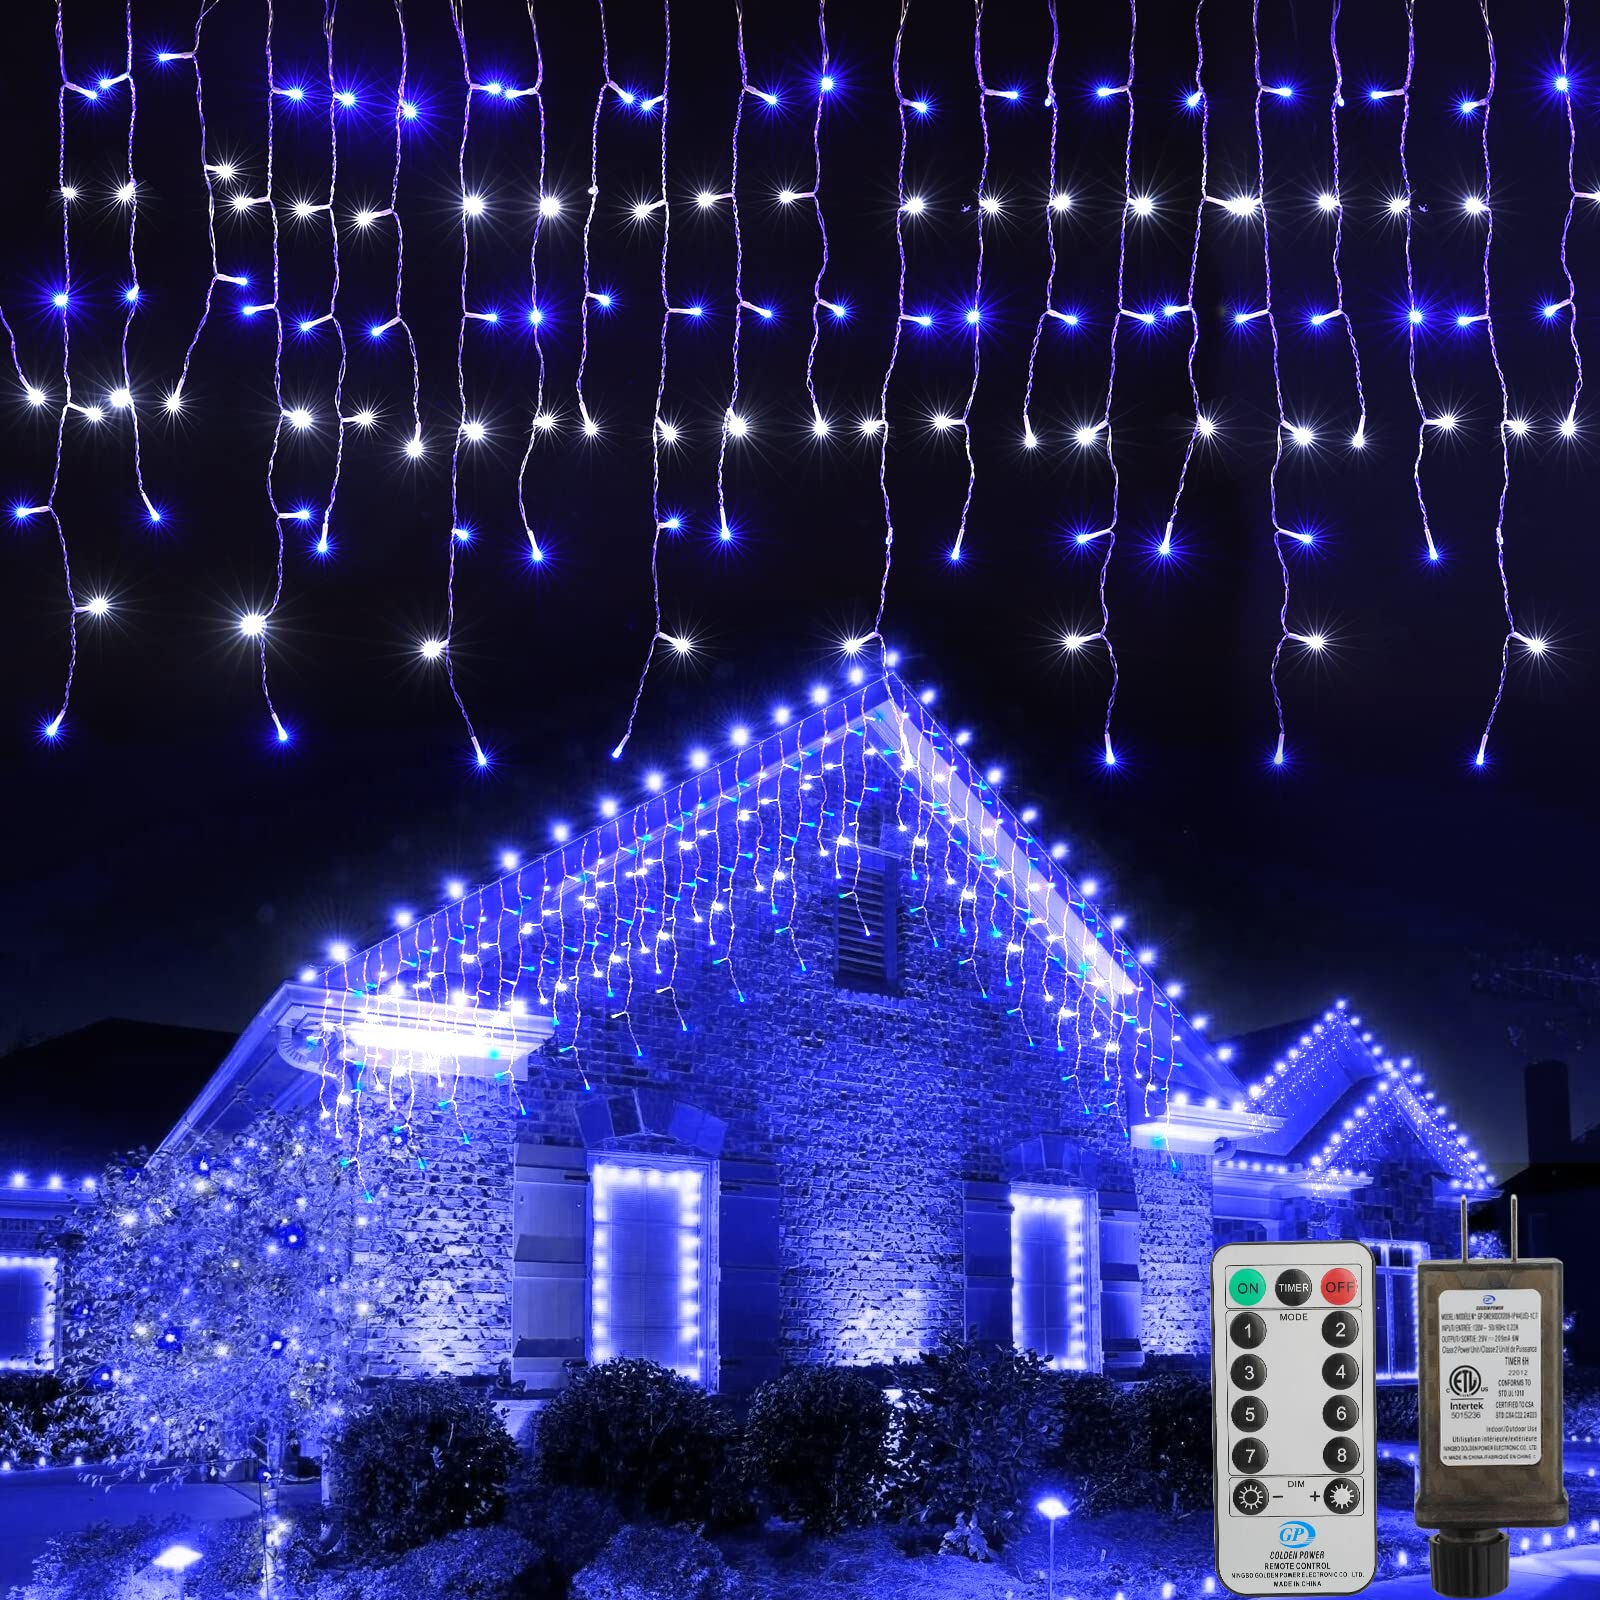 40 Feet / 81 Drops / 432 LED / Blue and White